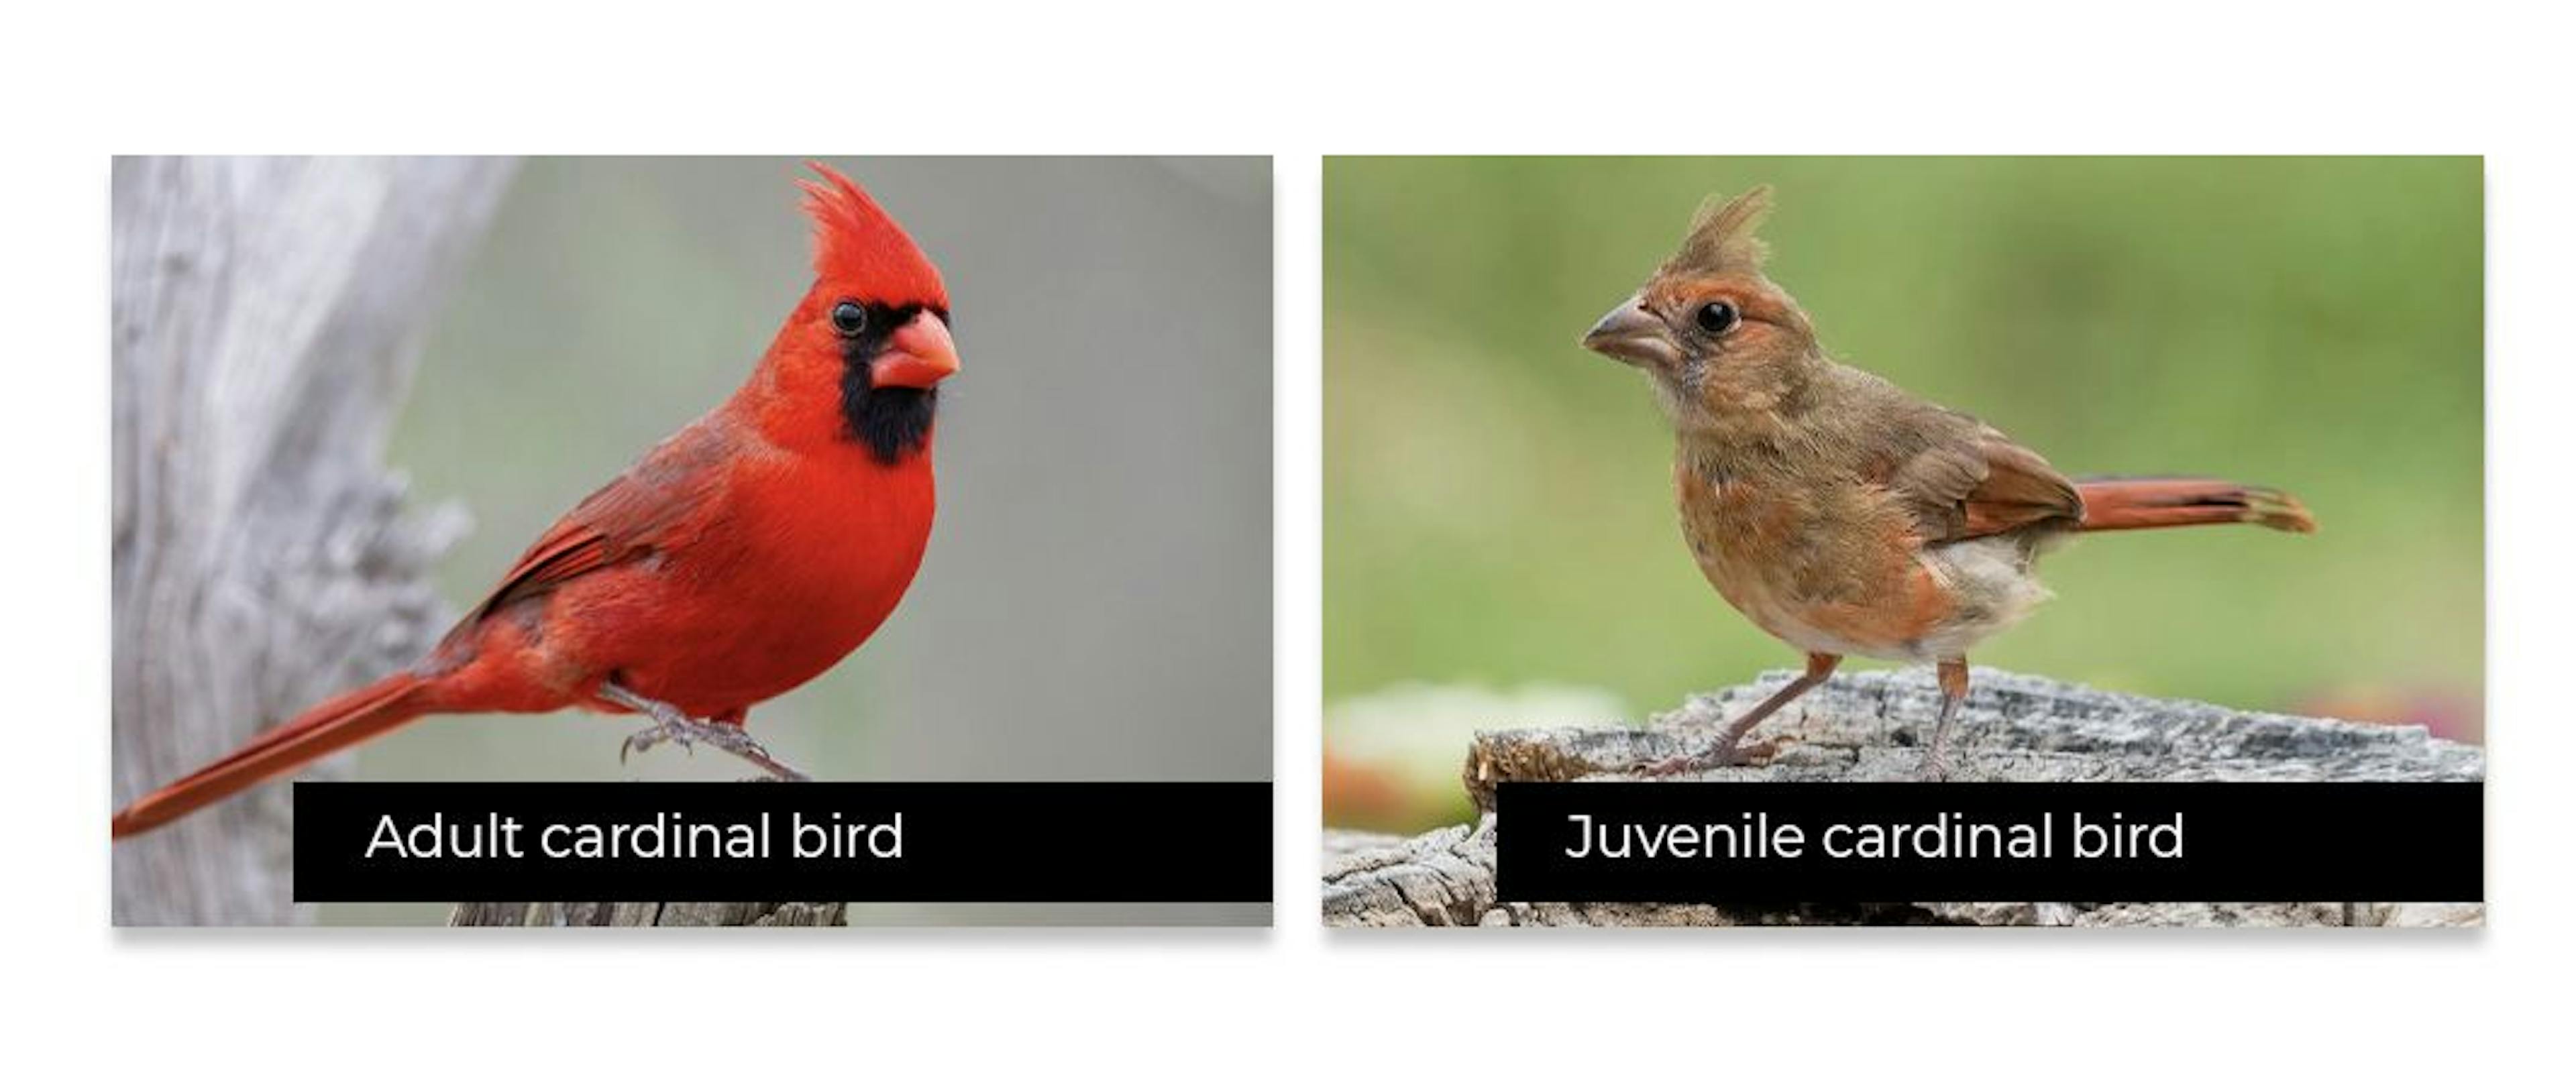 Often juvenile birds look nothing like adult ones